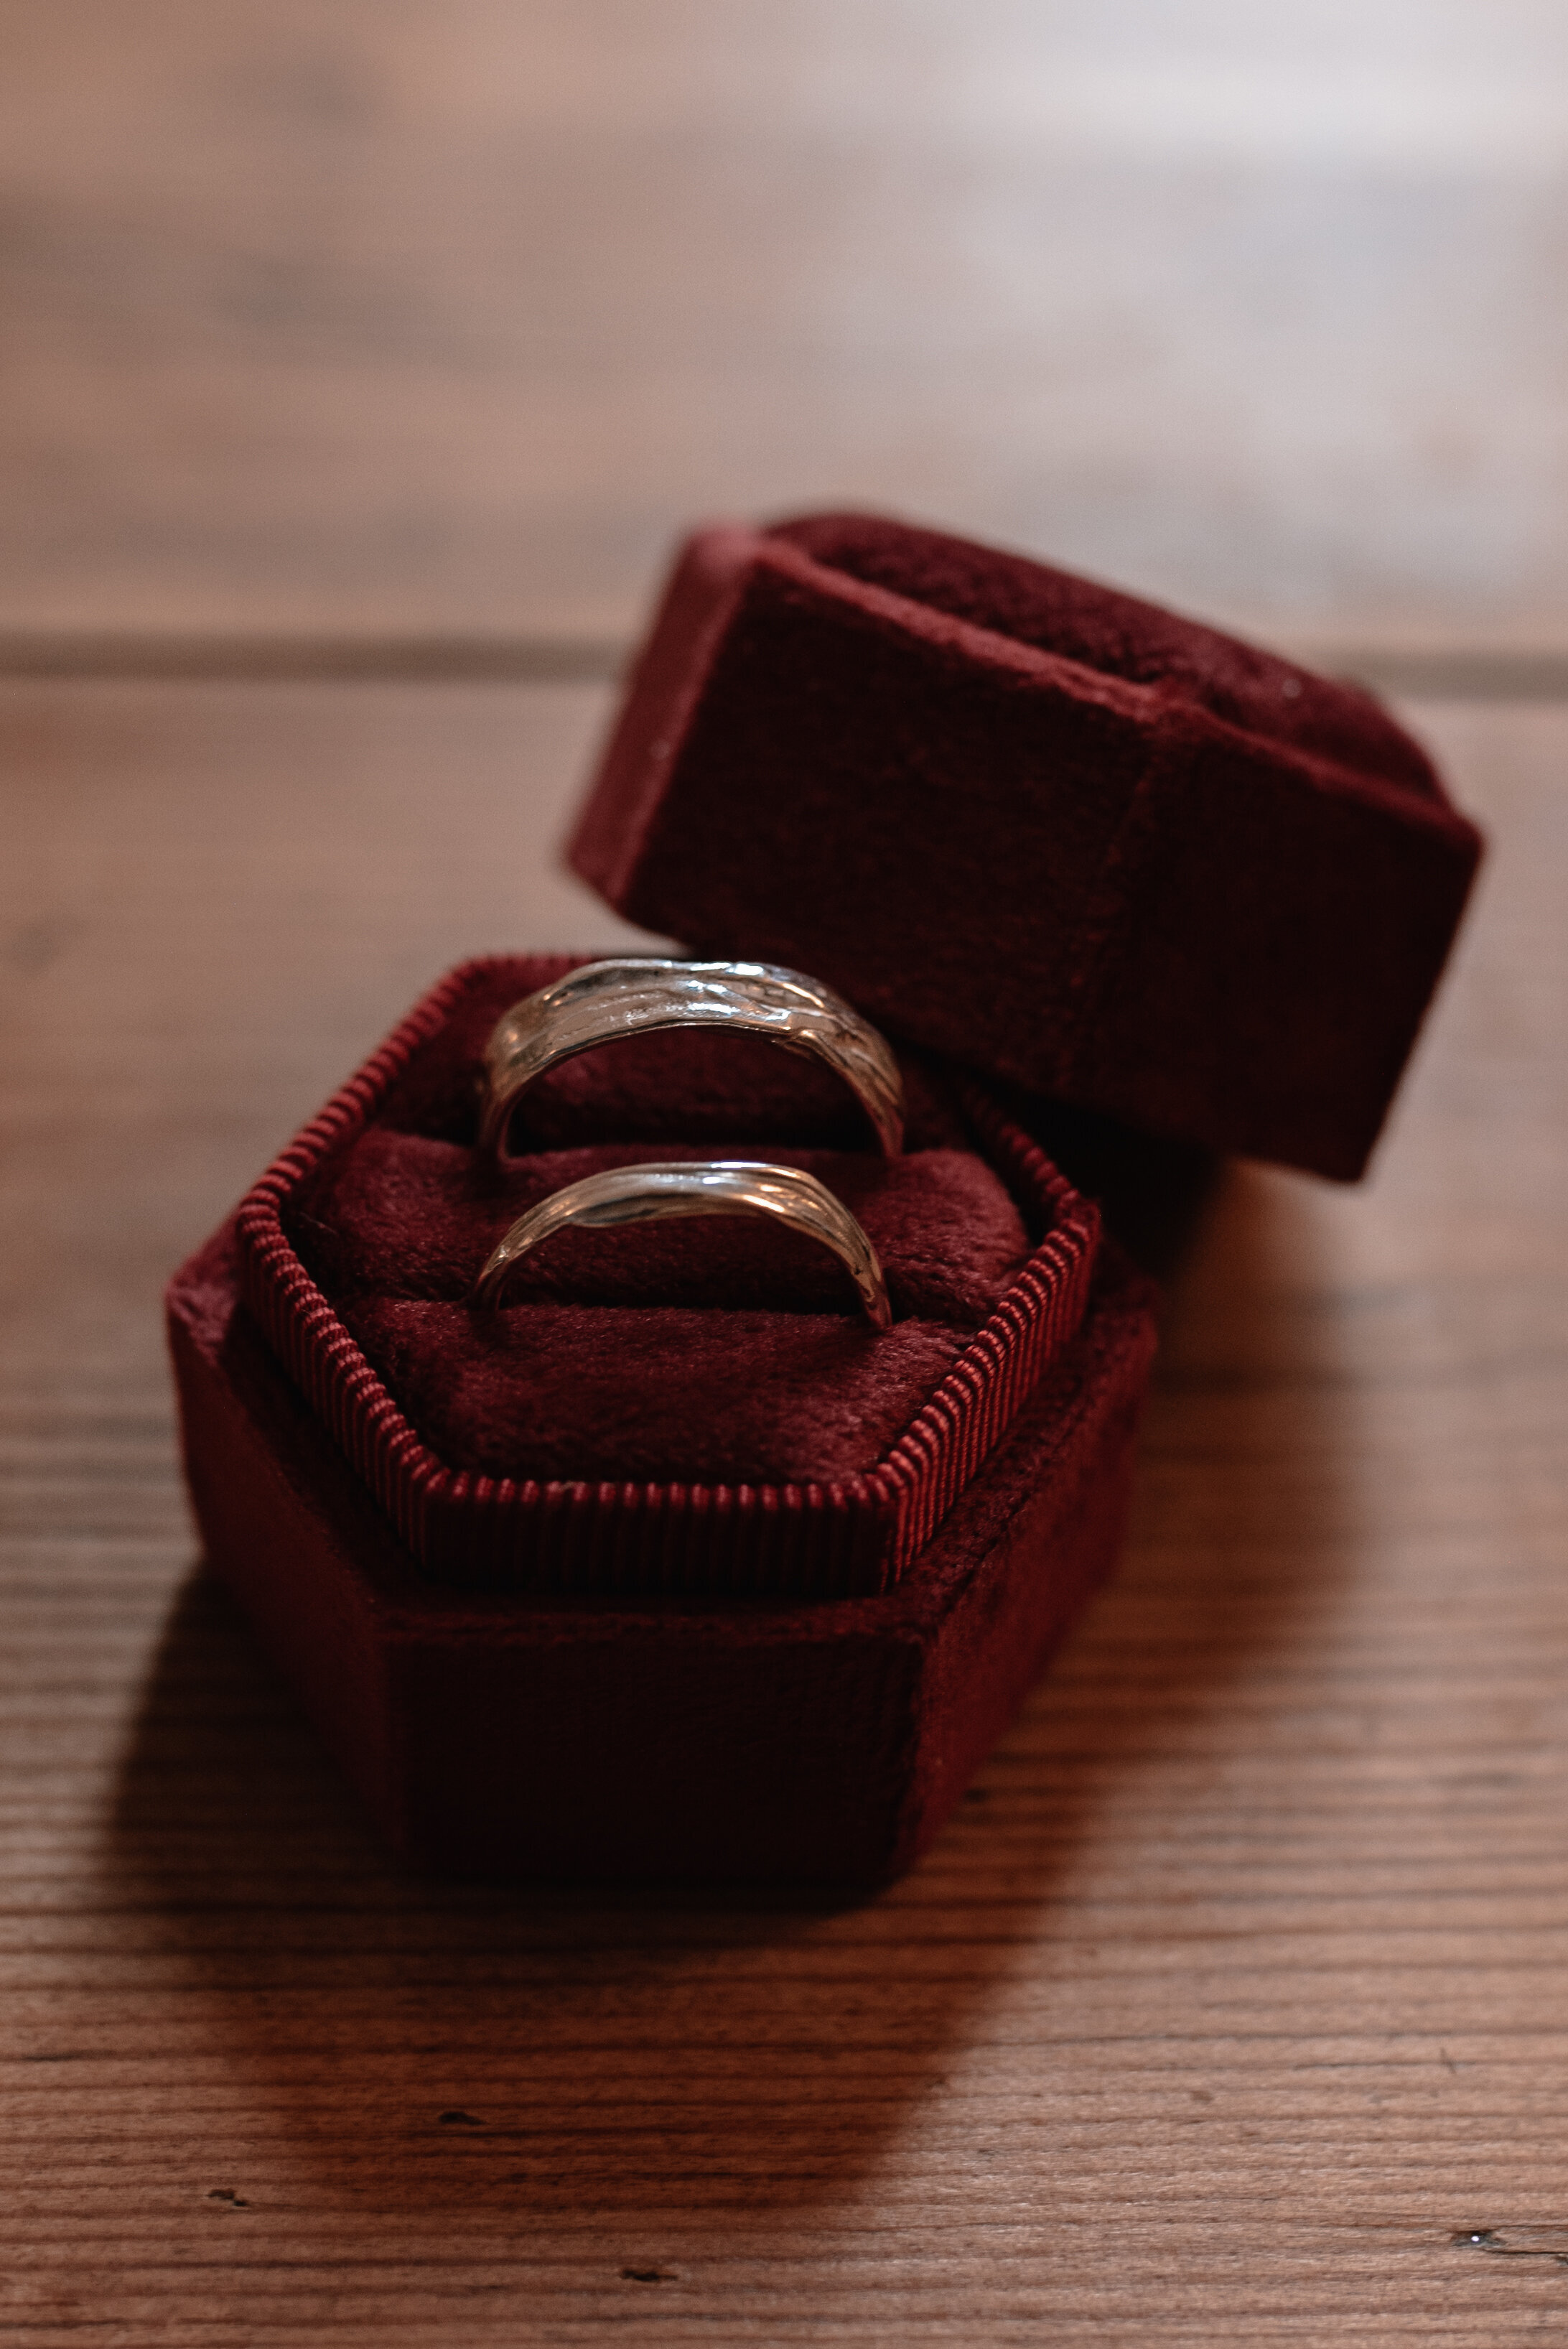 Hand crafted wedding rings seated in a red velvet ring box on top of a wooden table